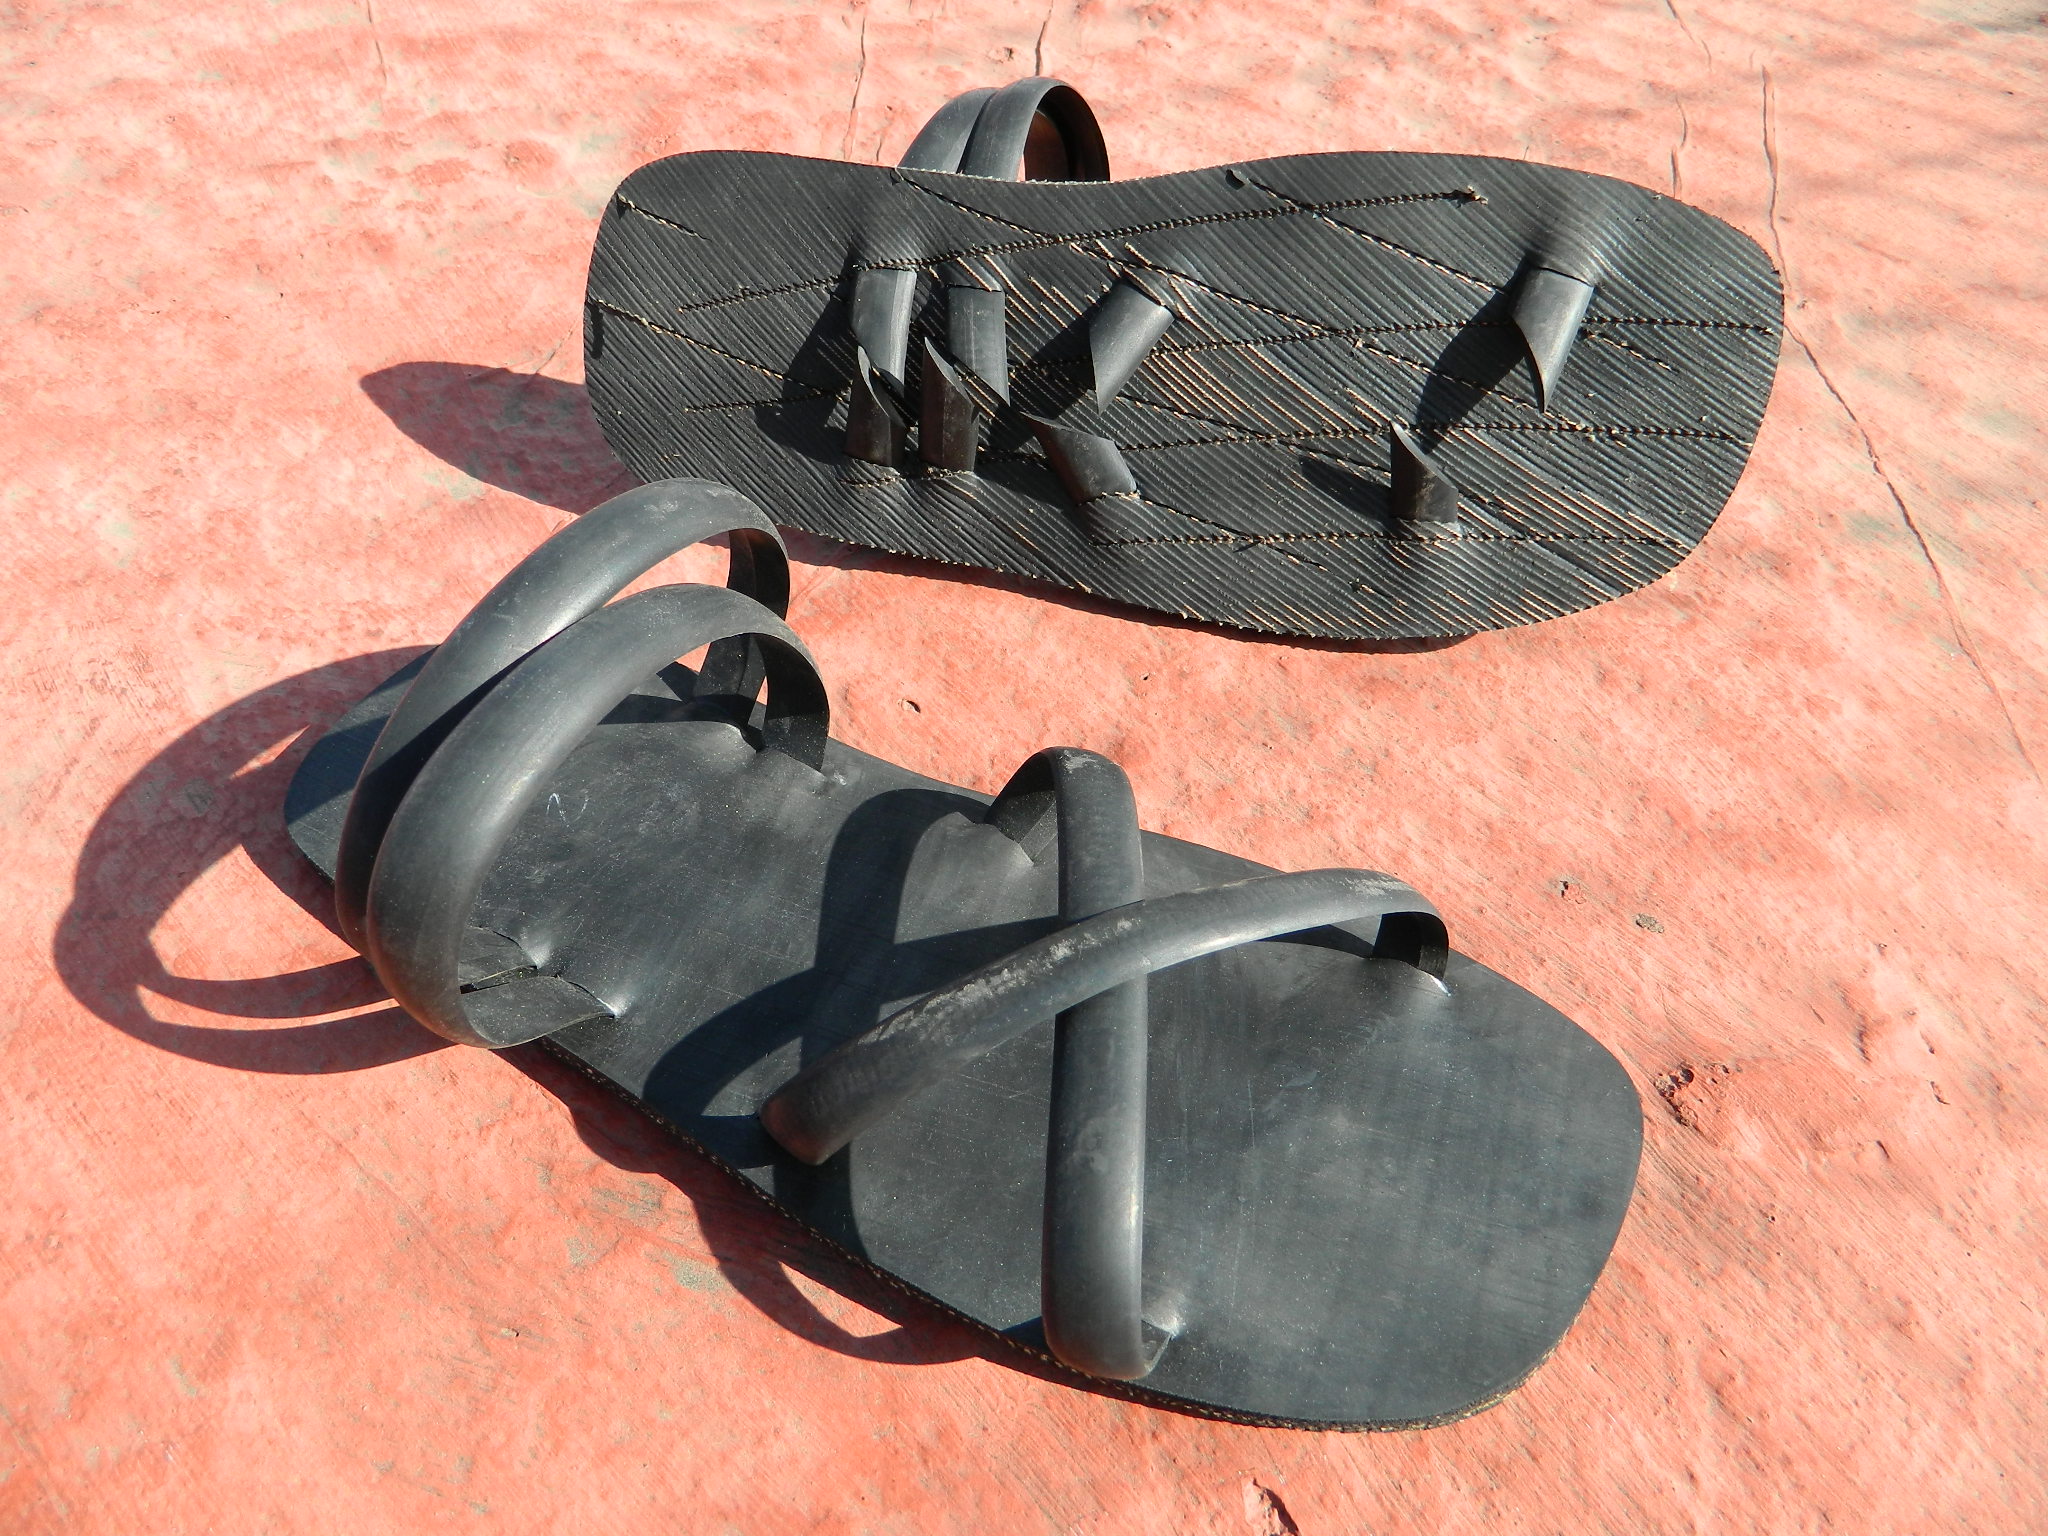 mexican huaraches with tire soles